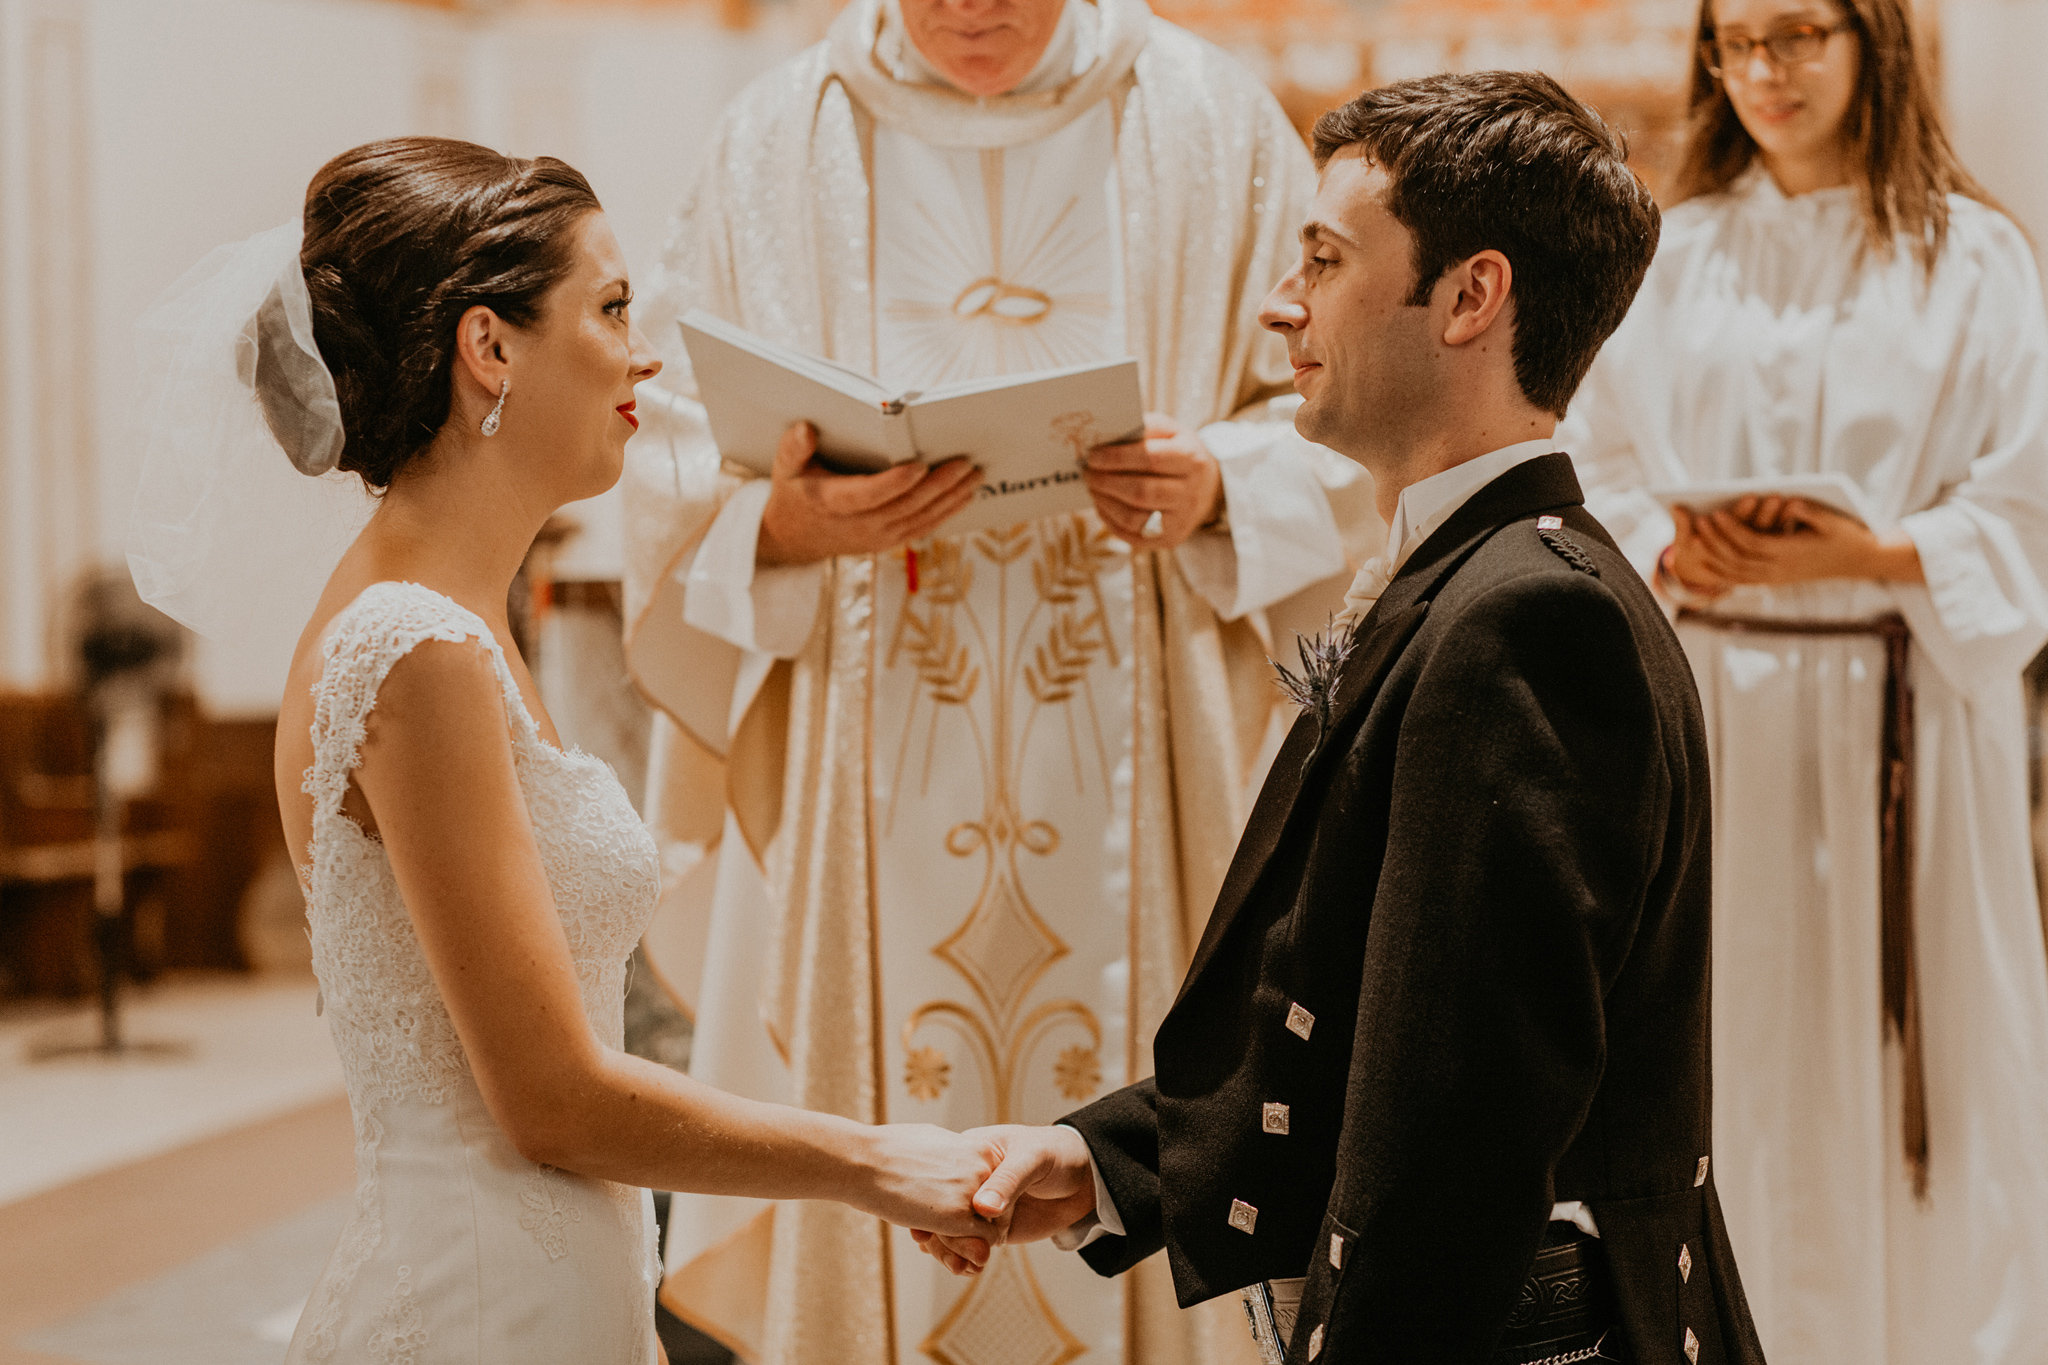 Bride and groom exchange vows in church wedding ceremony